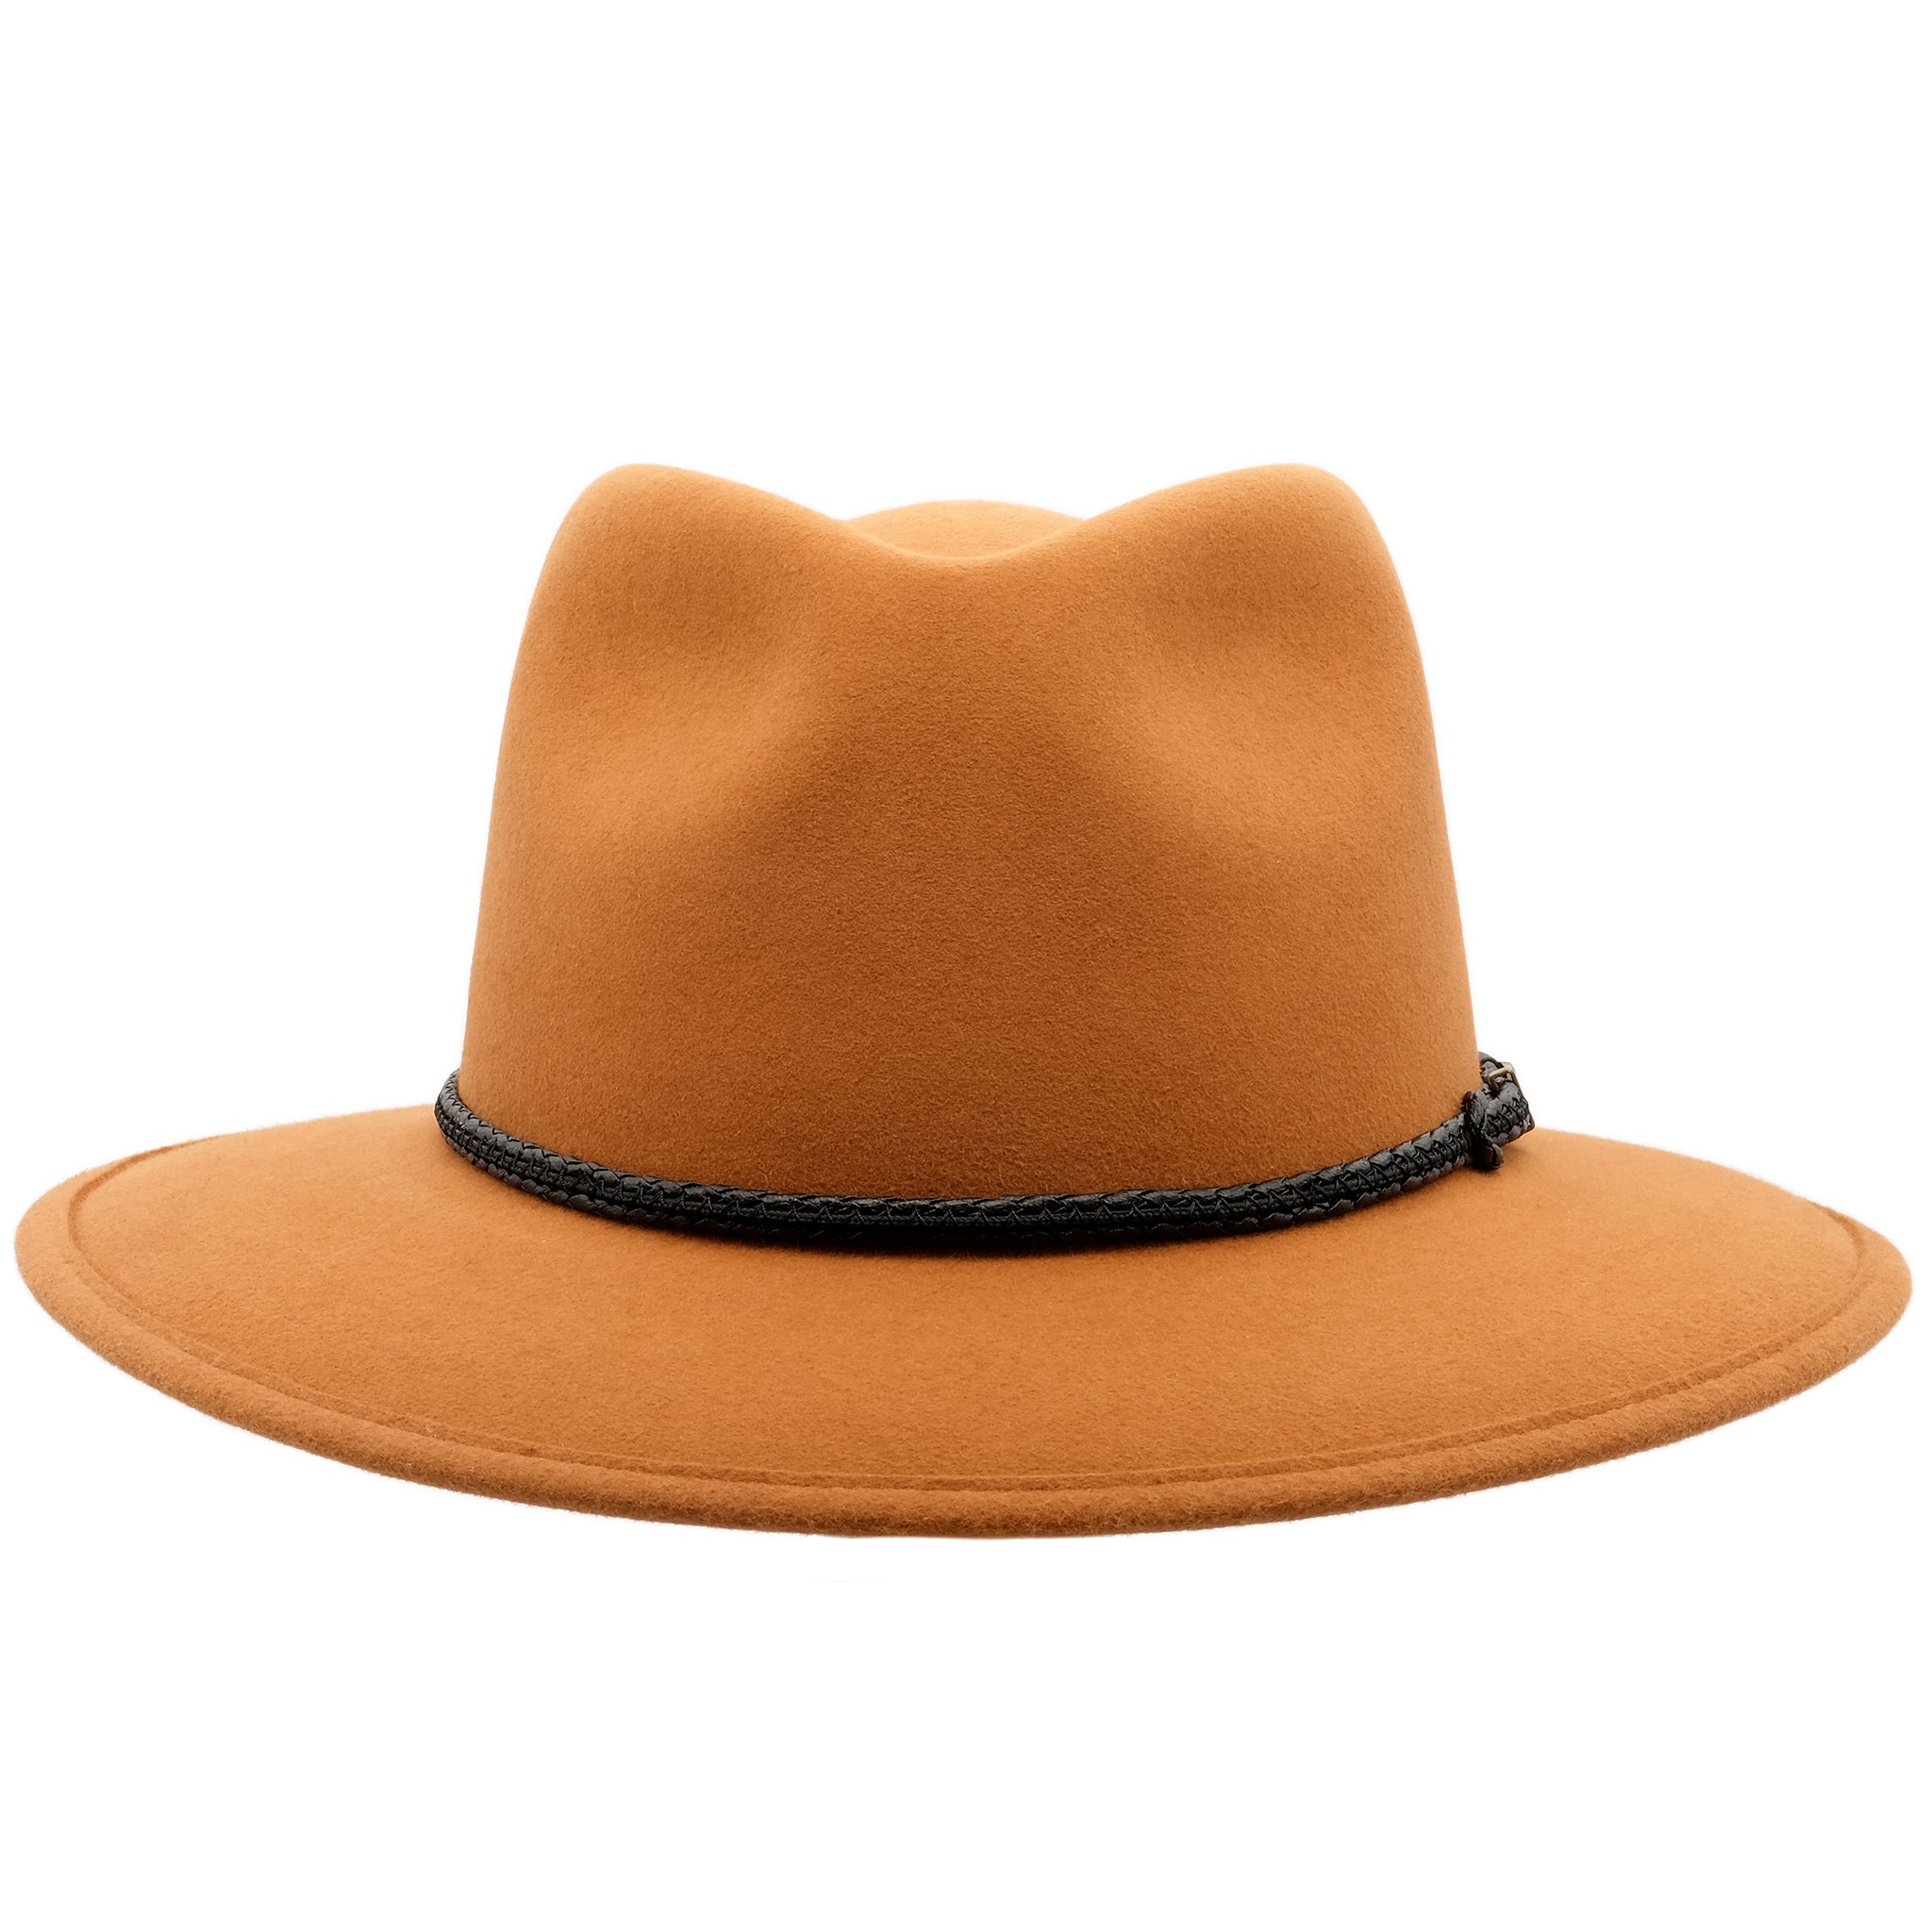 Front view of the rust coloured Akubra Traveller hat